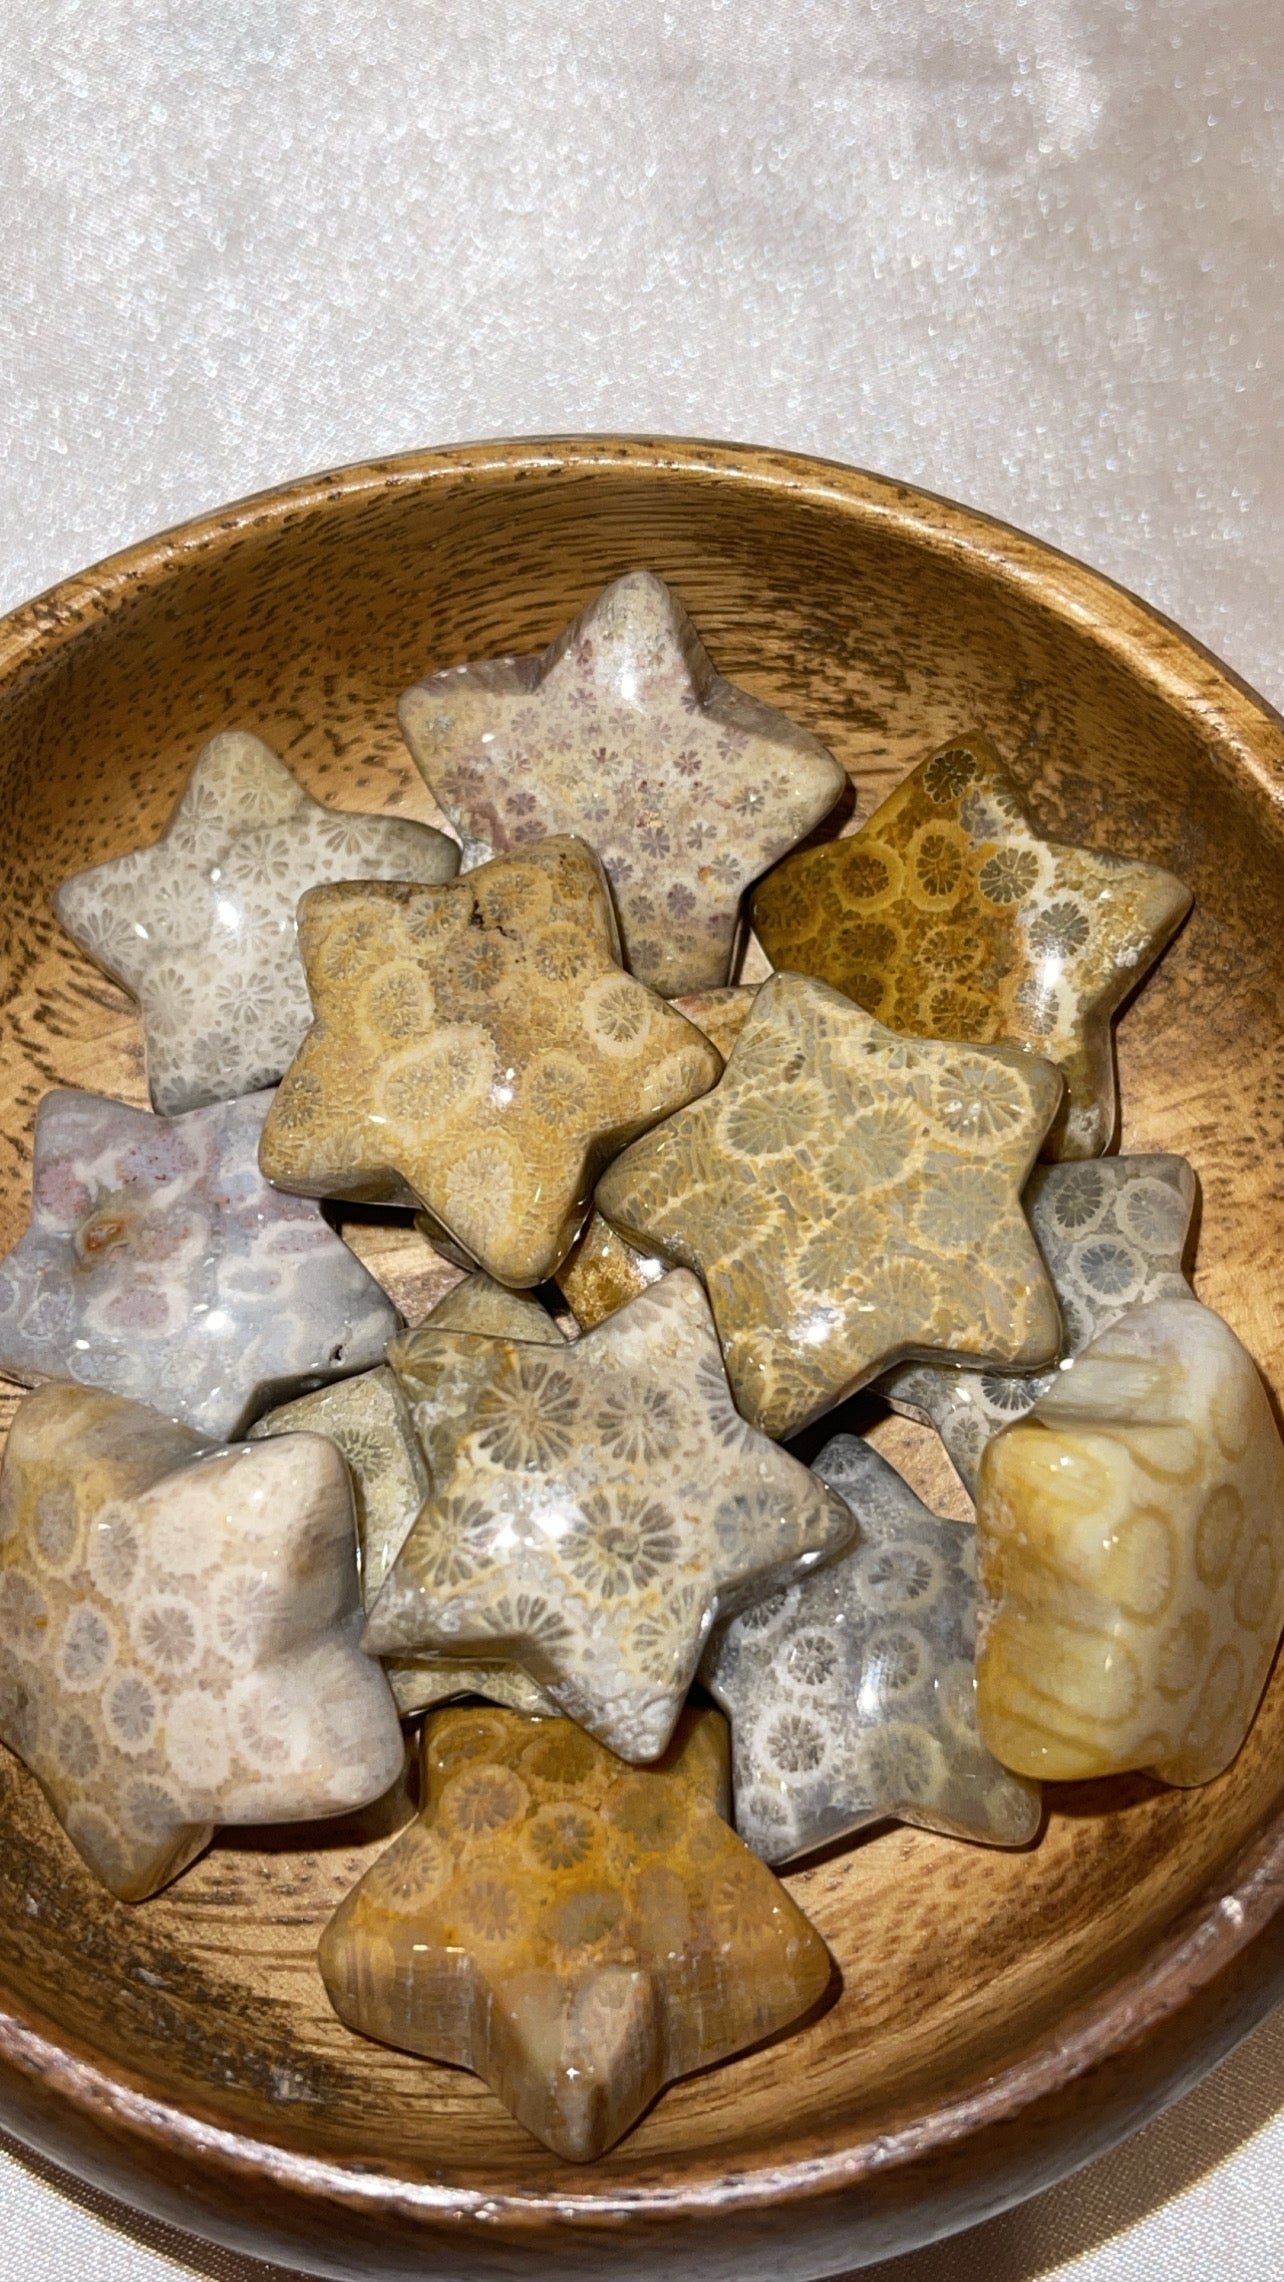 Coral Fossil Star